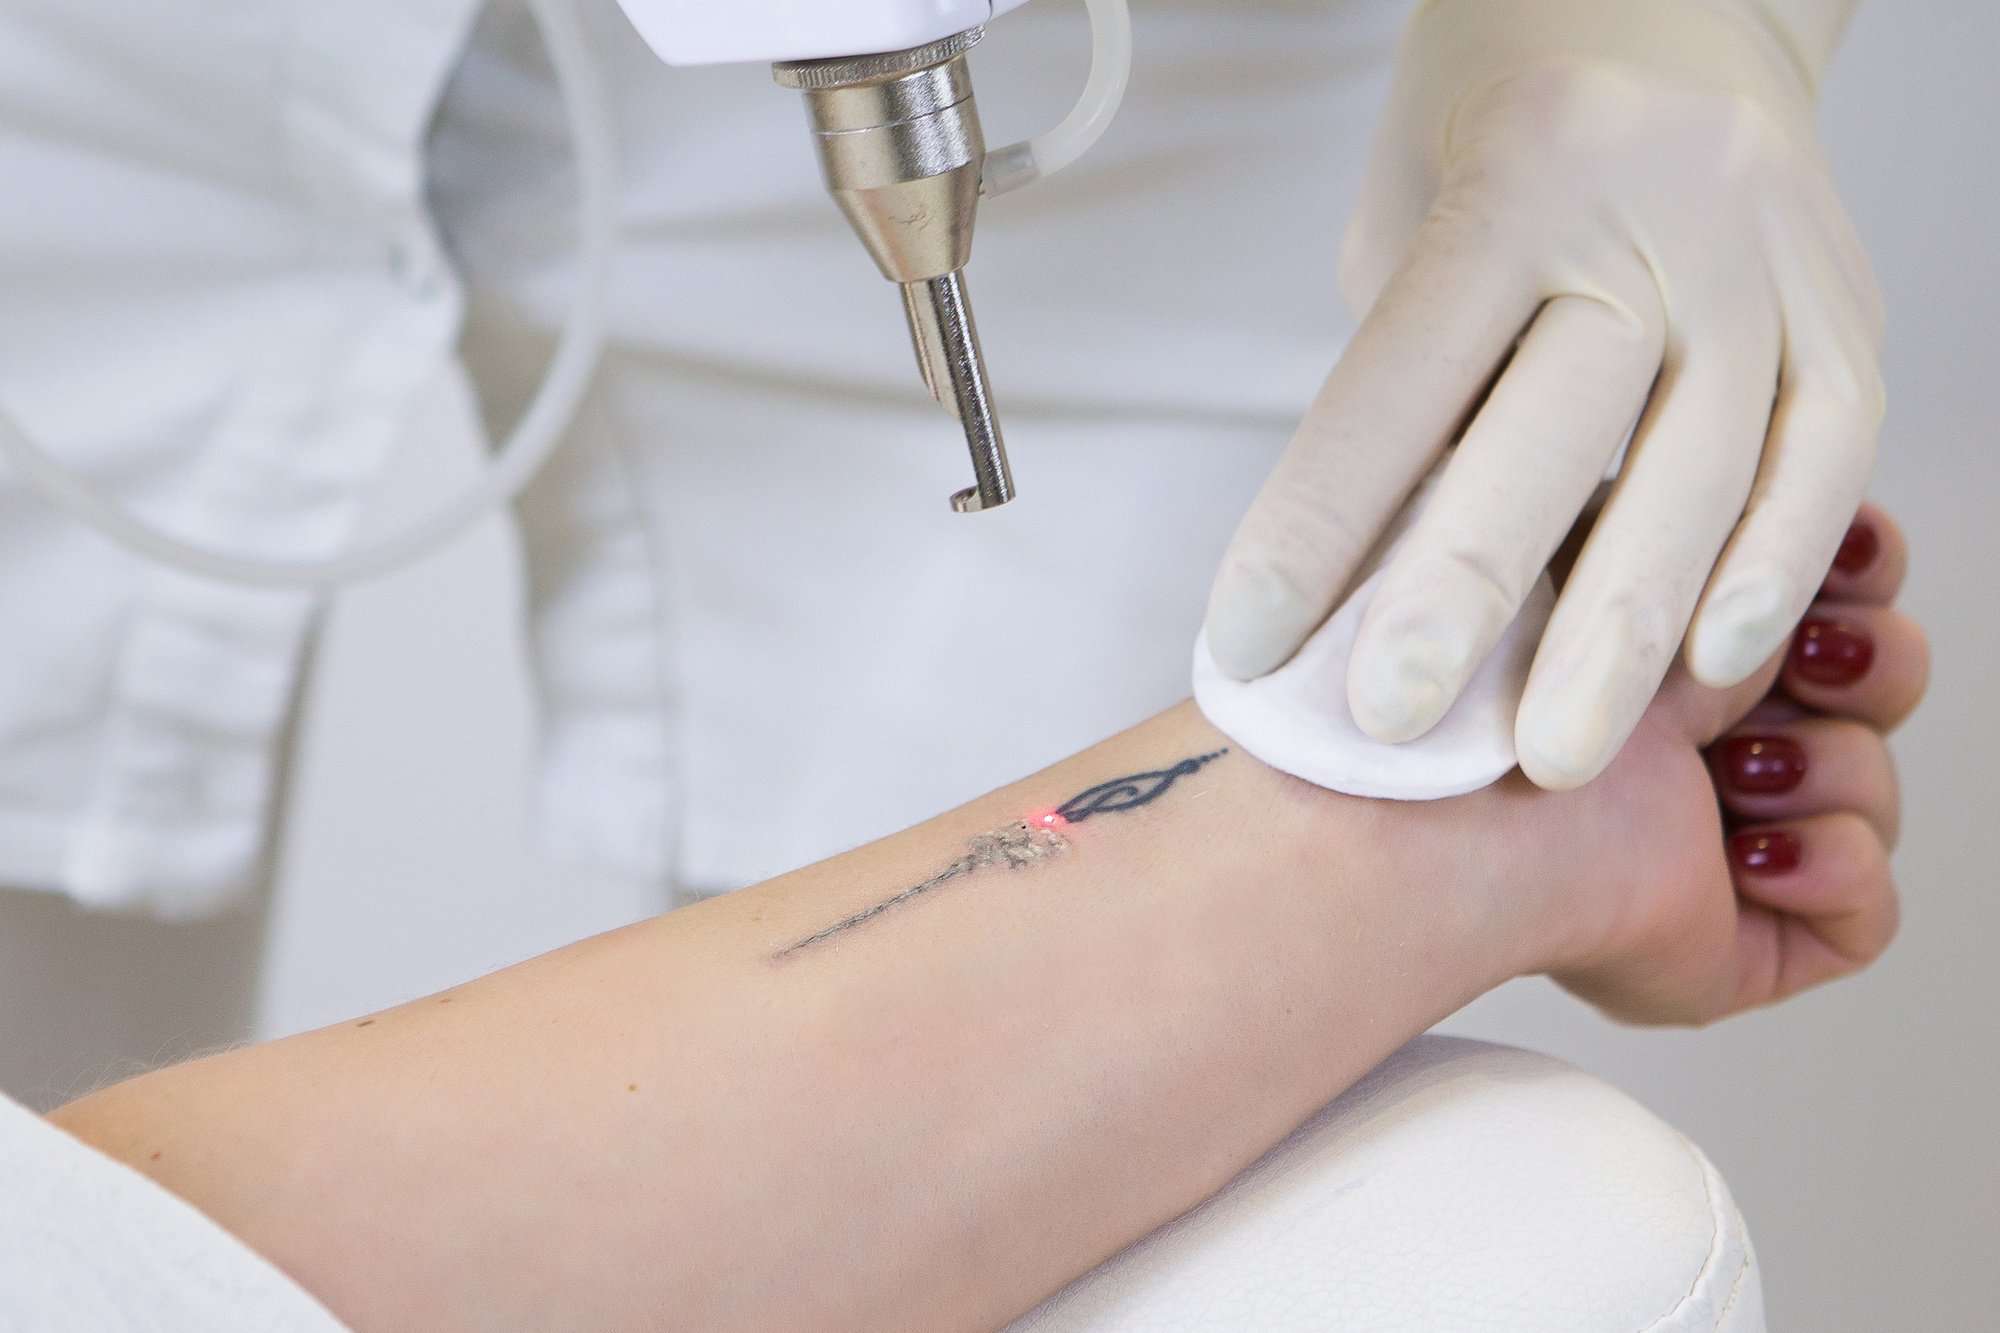 How Does Laser Tattoo Removal Work? 7 Facts You Need to Know